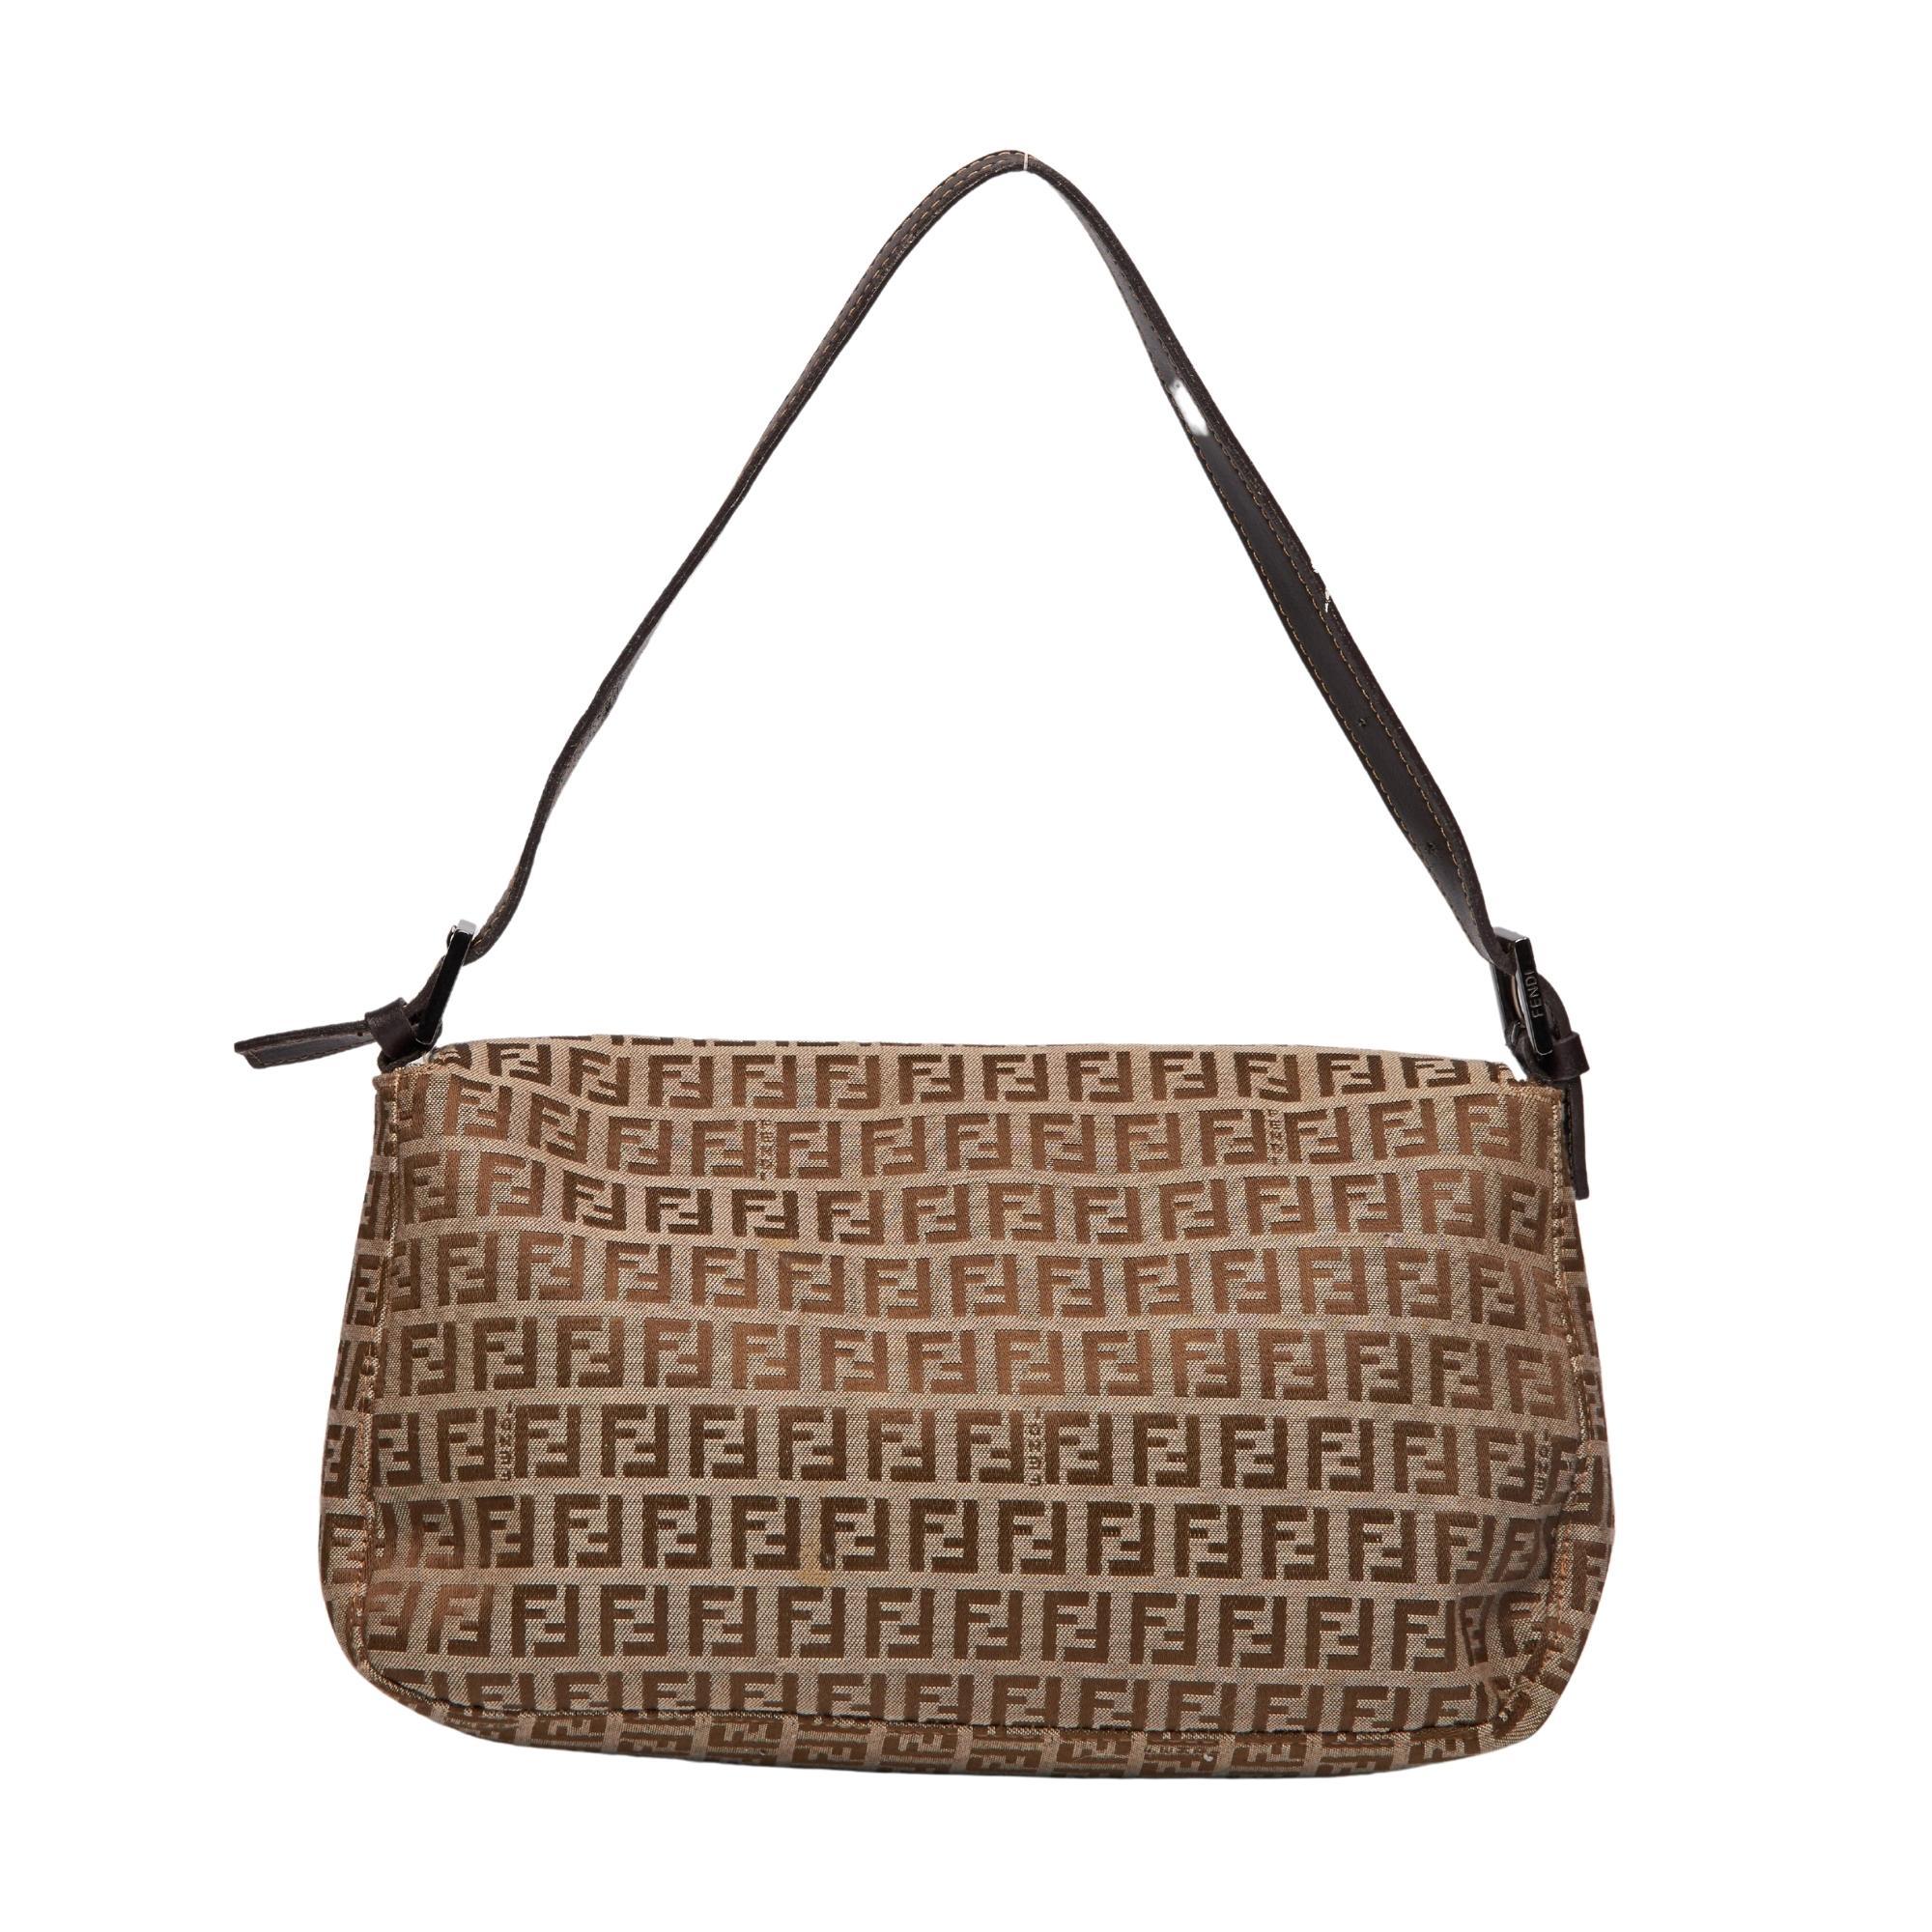 
This Fendi Beige/Brown Zucca Canvas Baguette Bag features beige and brown Zucca Canvas, a Fendi Forever clasp at the center, a removable flat leather shoulder strap and cloth interior lining.

COLOR: Beige/brown
MATERIAL: Canvas
MEASURES: H 8” x L